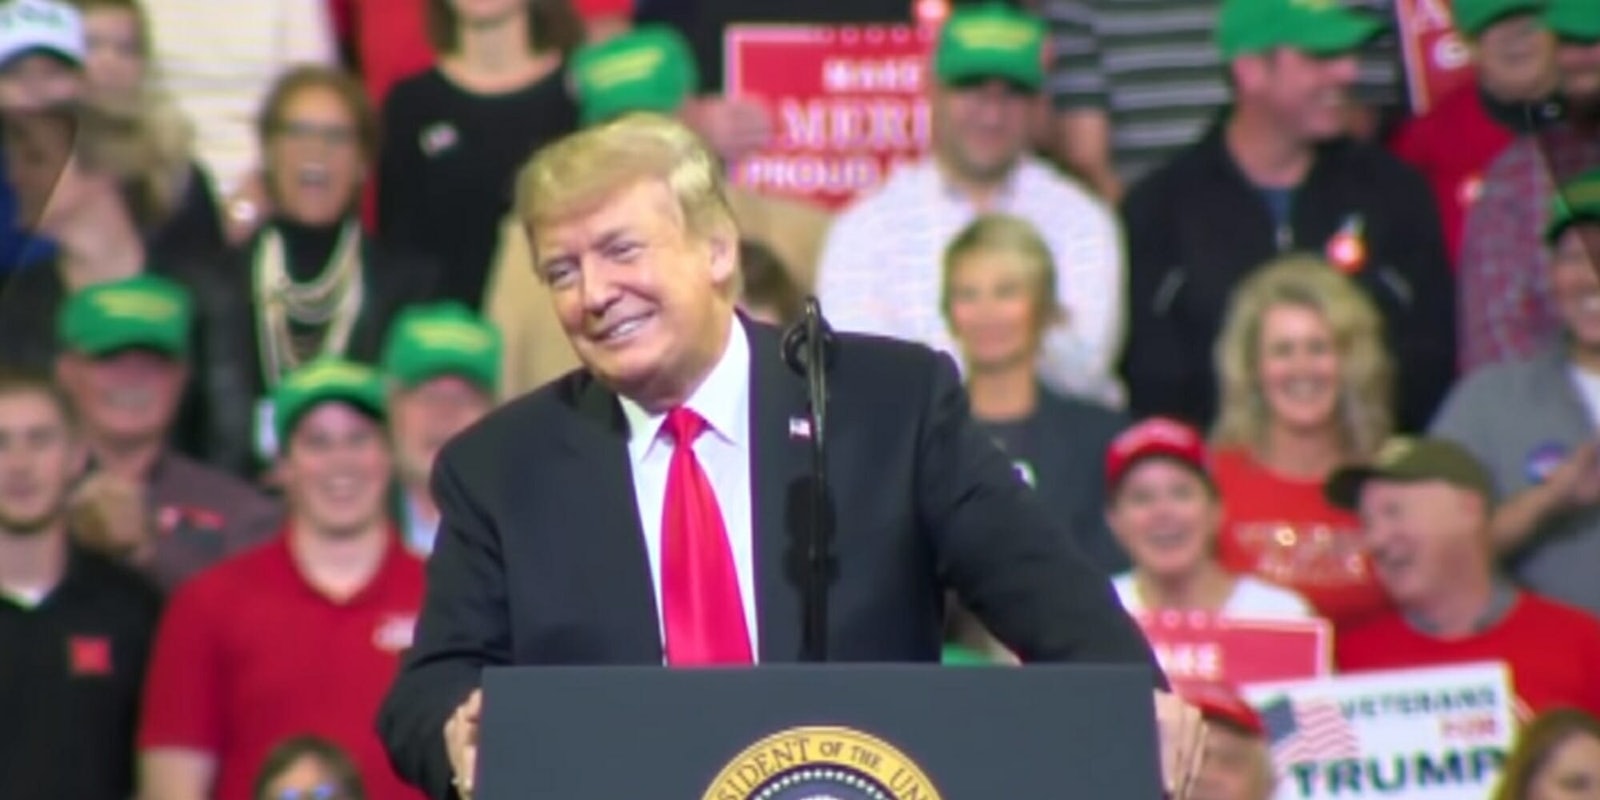 Trump encouraged supporters after they chanted 'lock her up.'